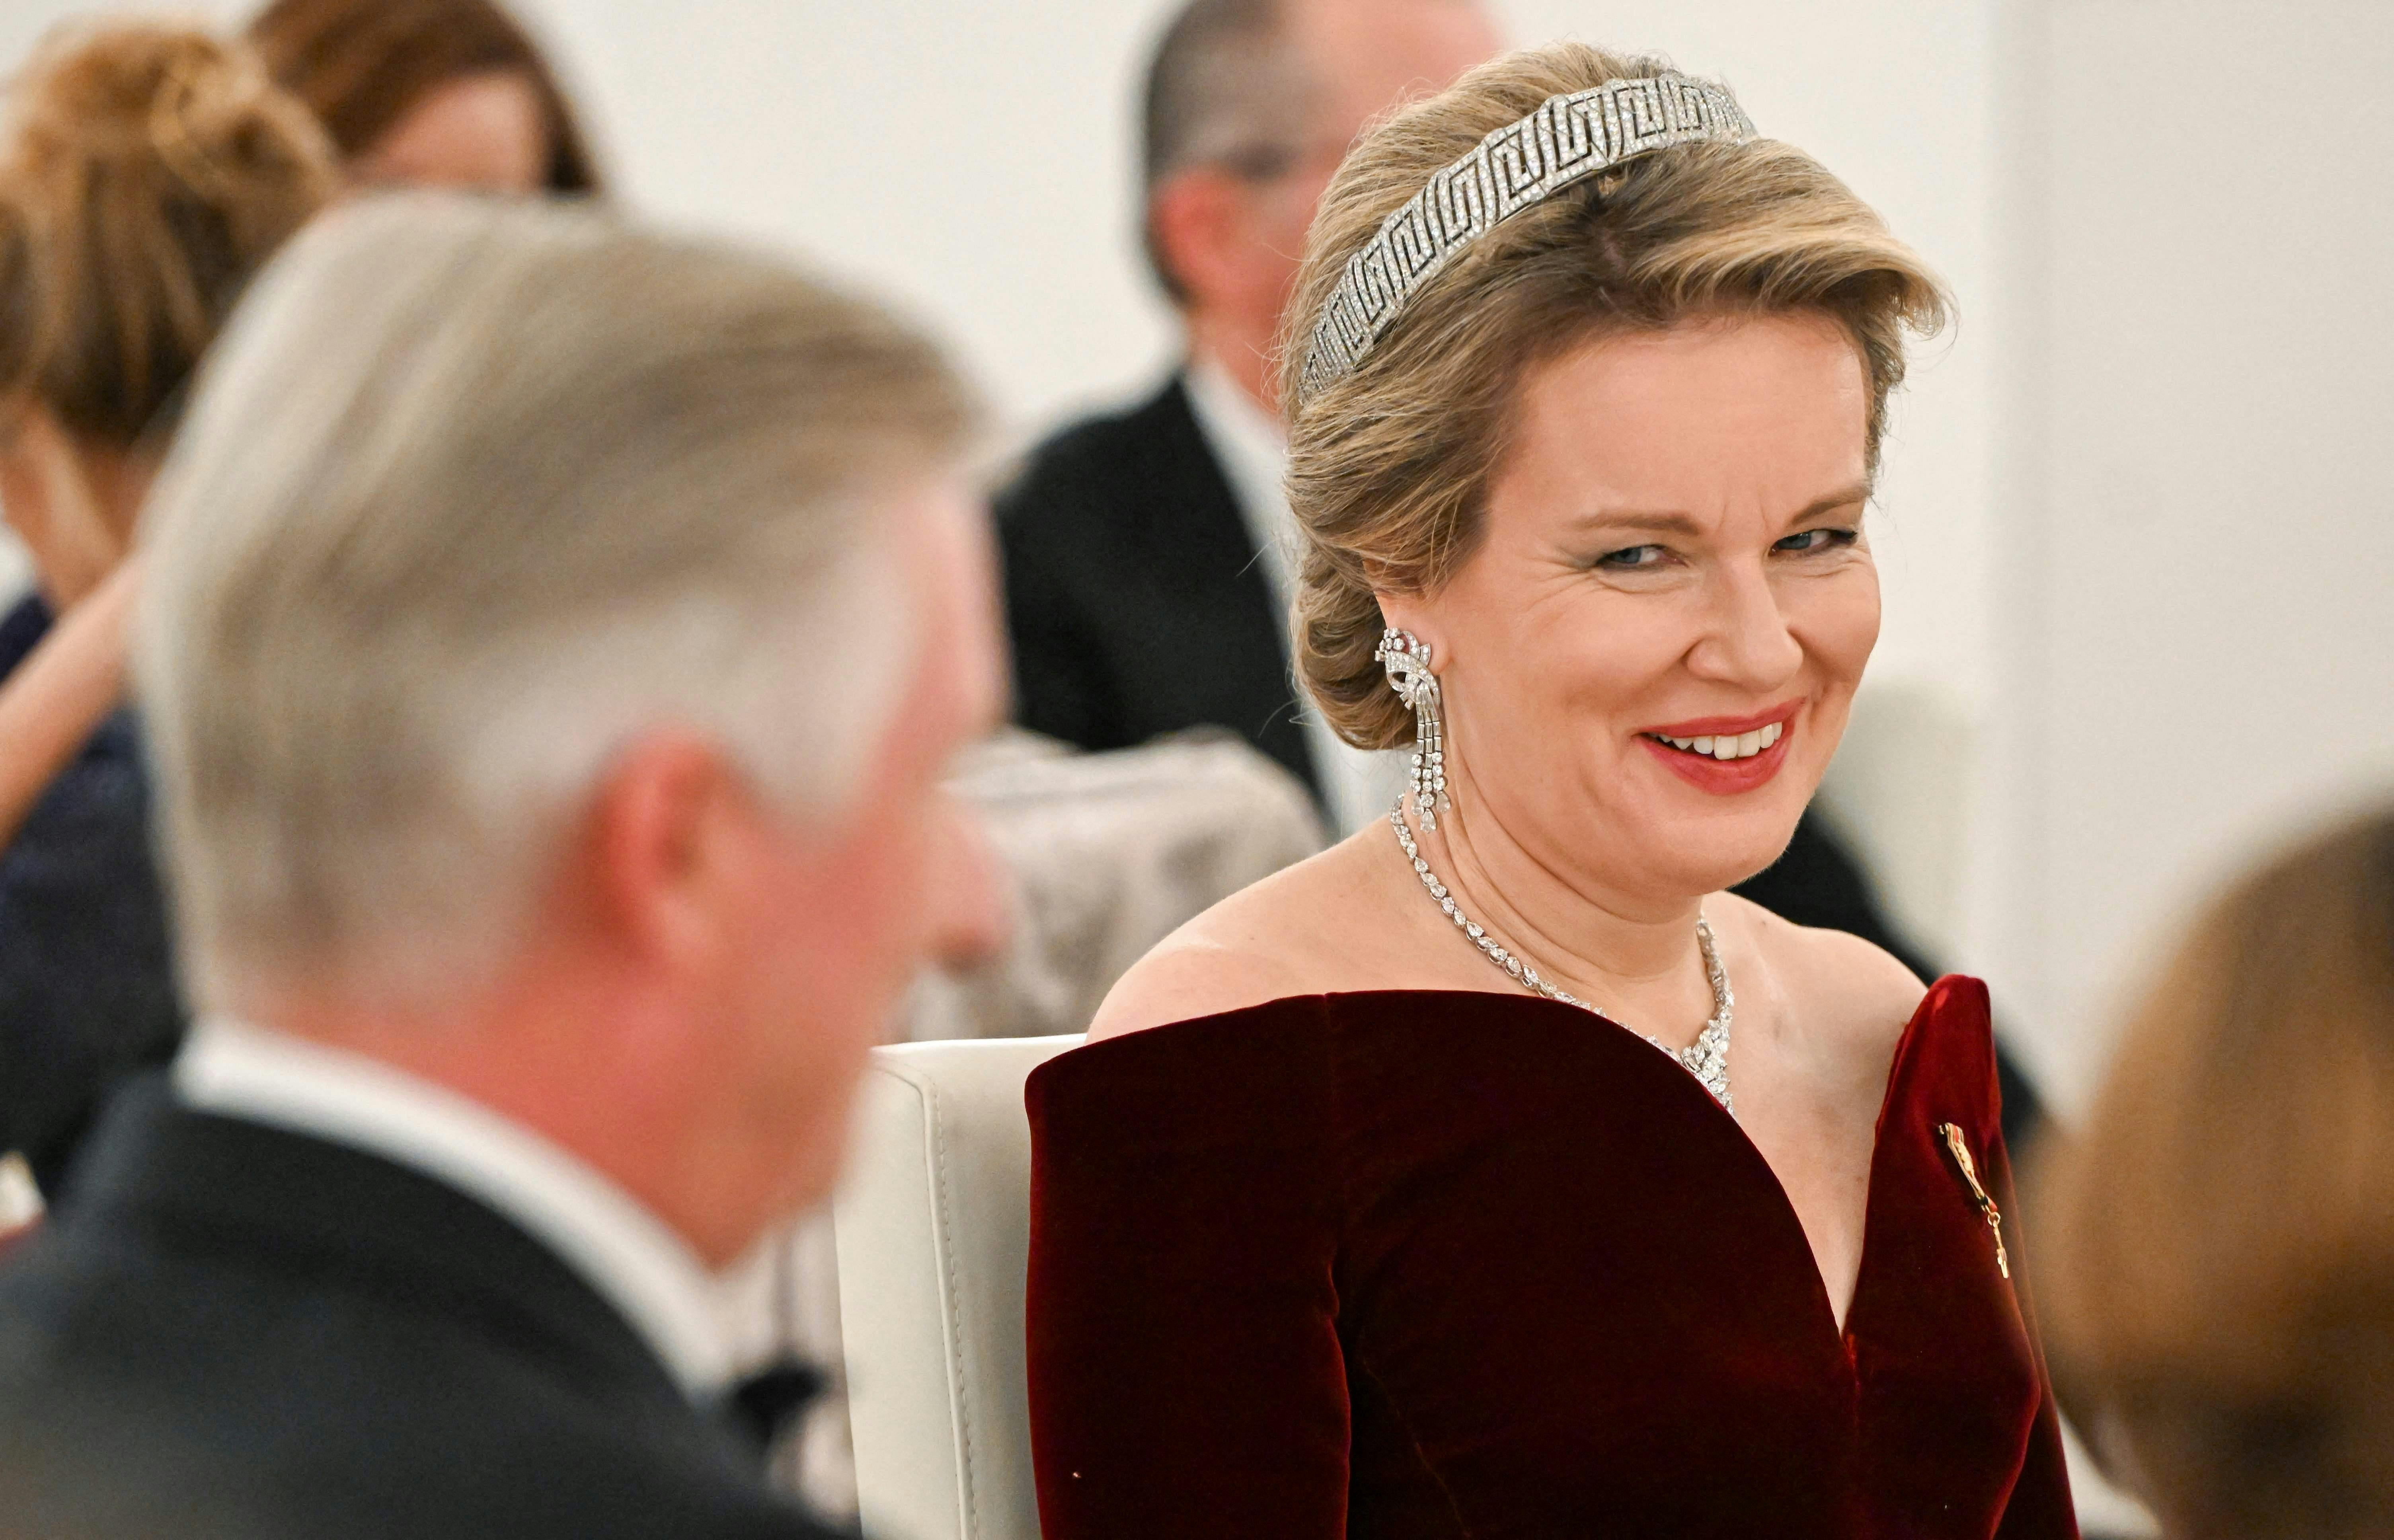 King Philippe - Filip of Belgium (L) and Queen Mathilde of Belgium are pictured during a state banquet at the presidential Bellevue Palace in Berlin, on December 5, 2023. (Photo by Jens Kalaene / POOL / AFP)